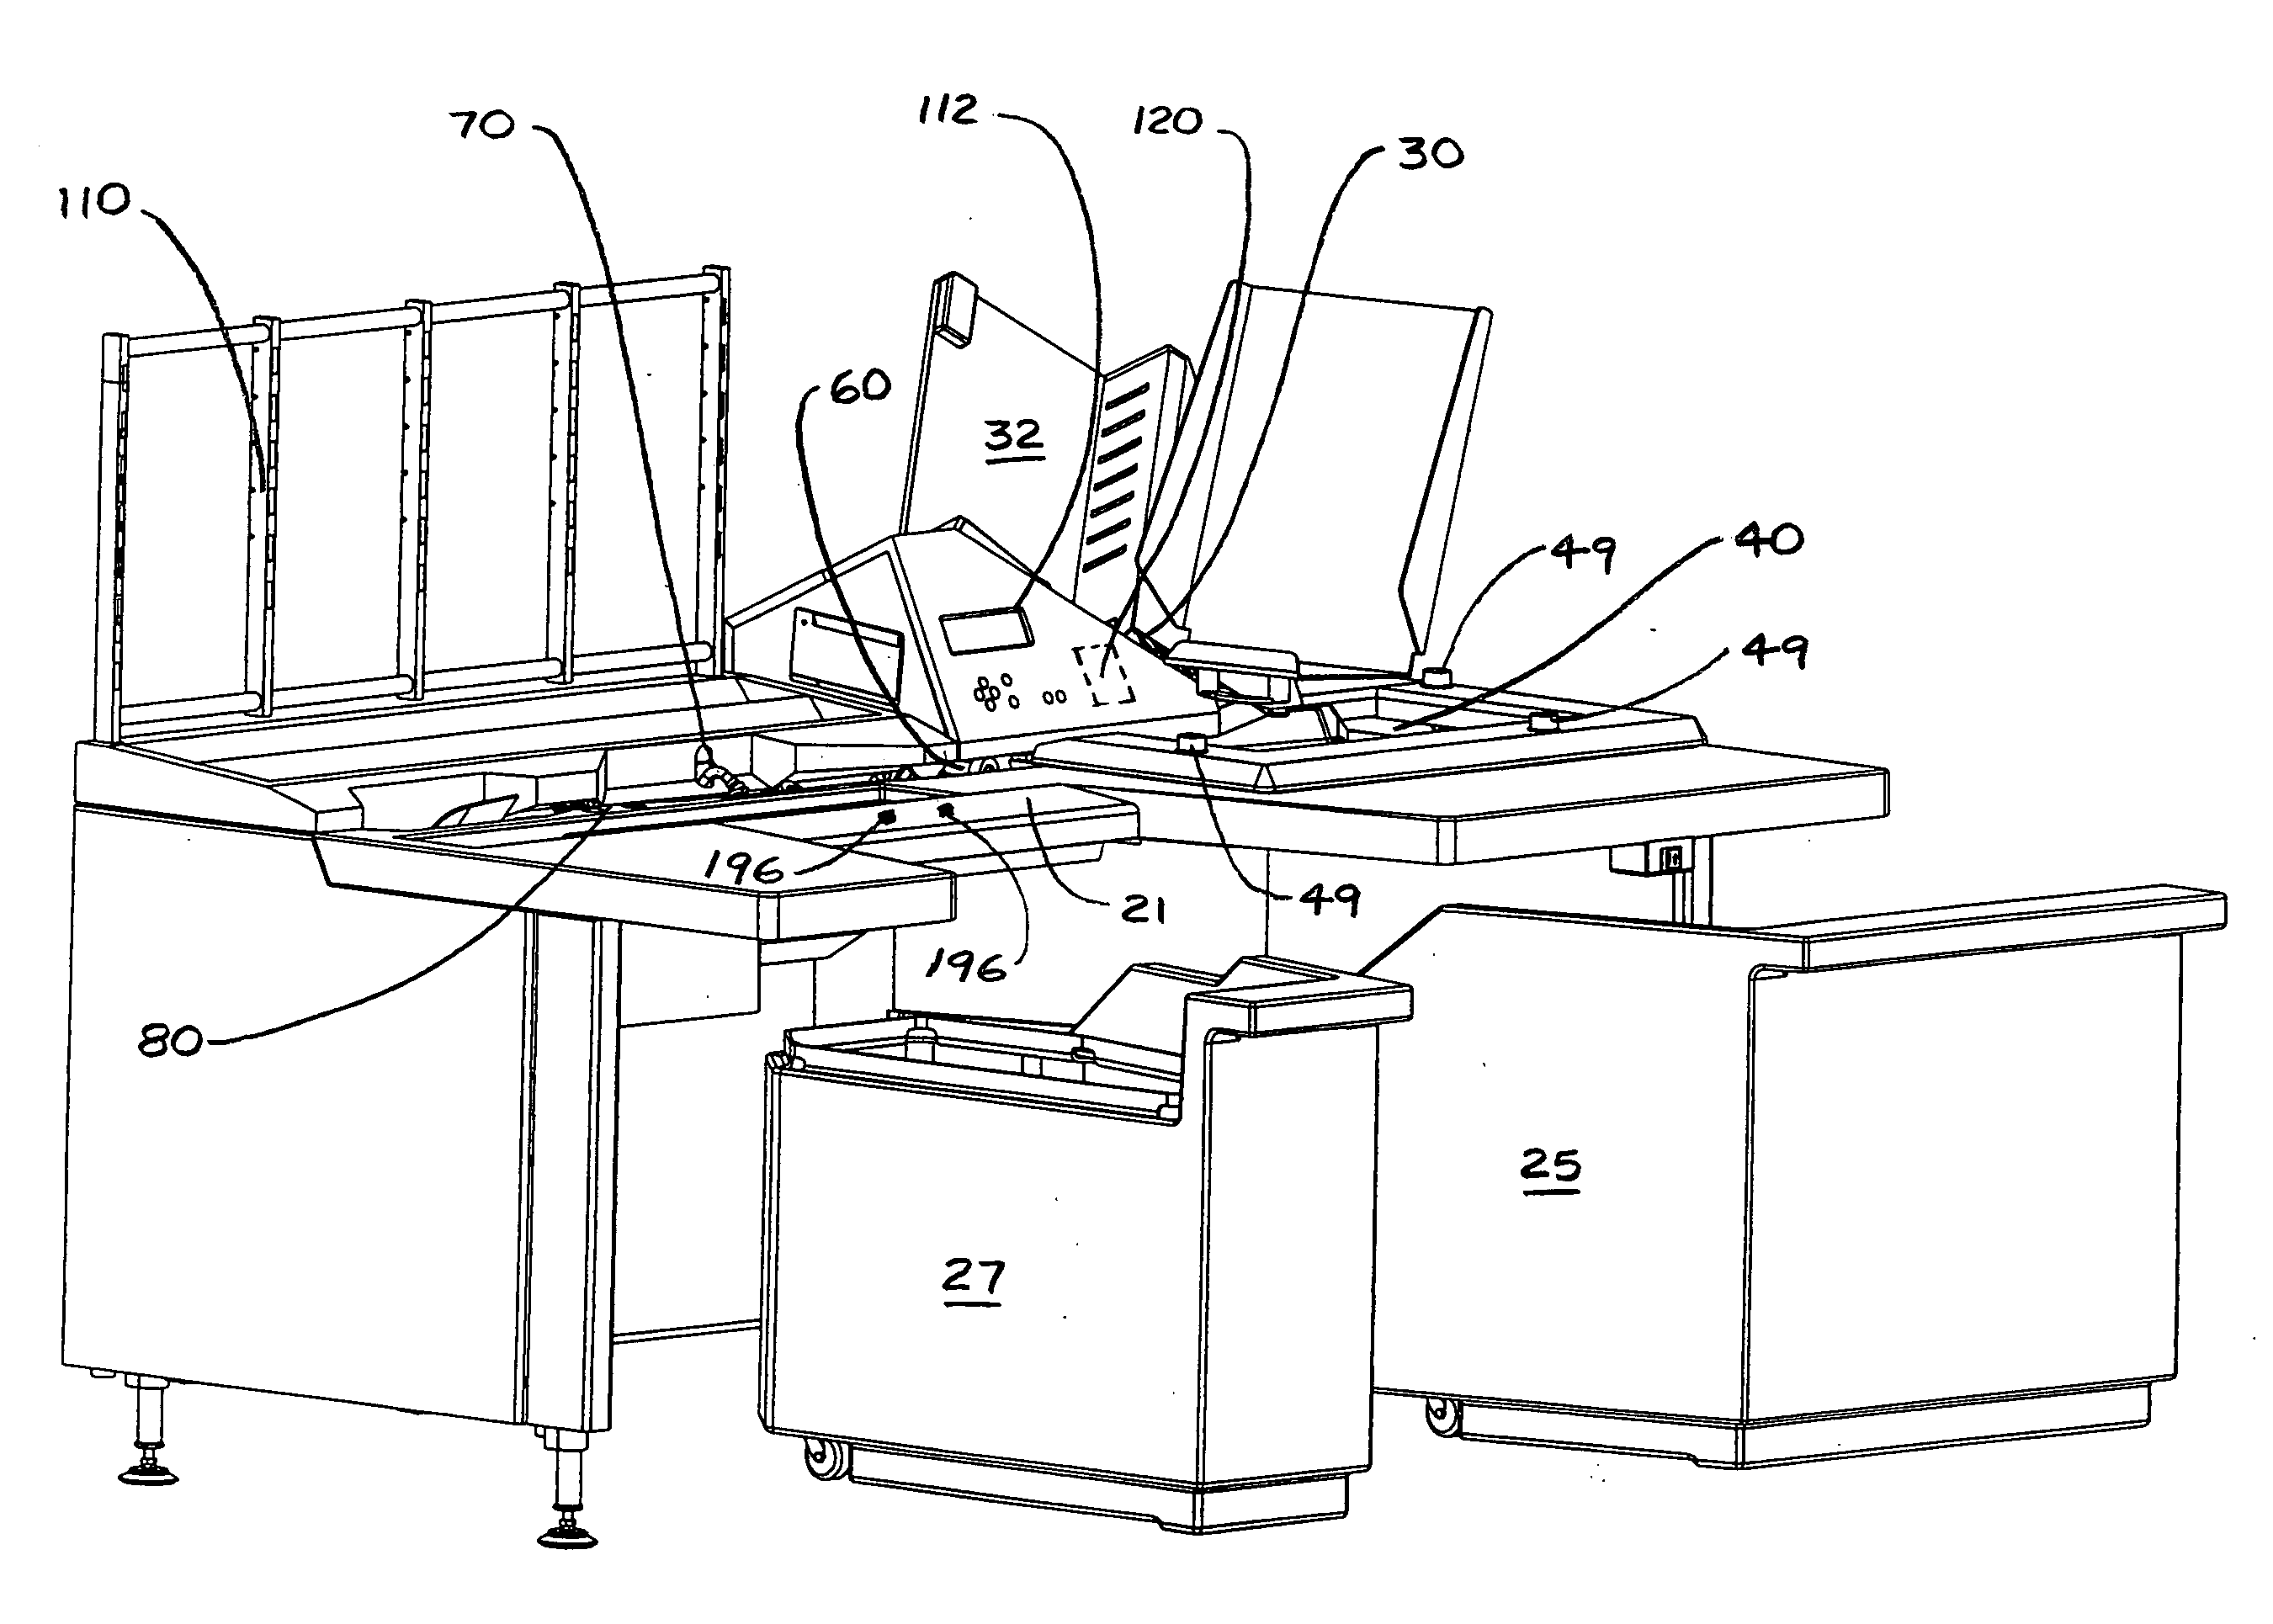 Method and apparatus for processing envelopes containing contents